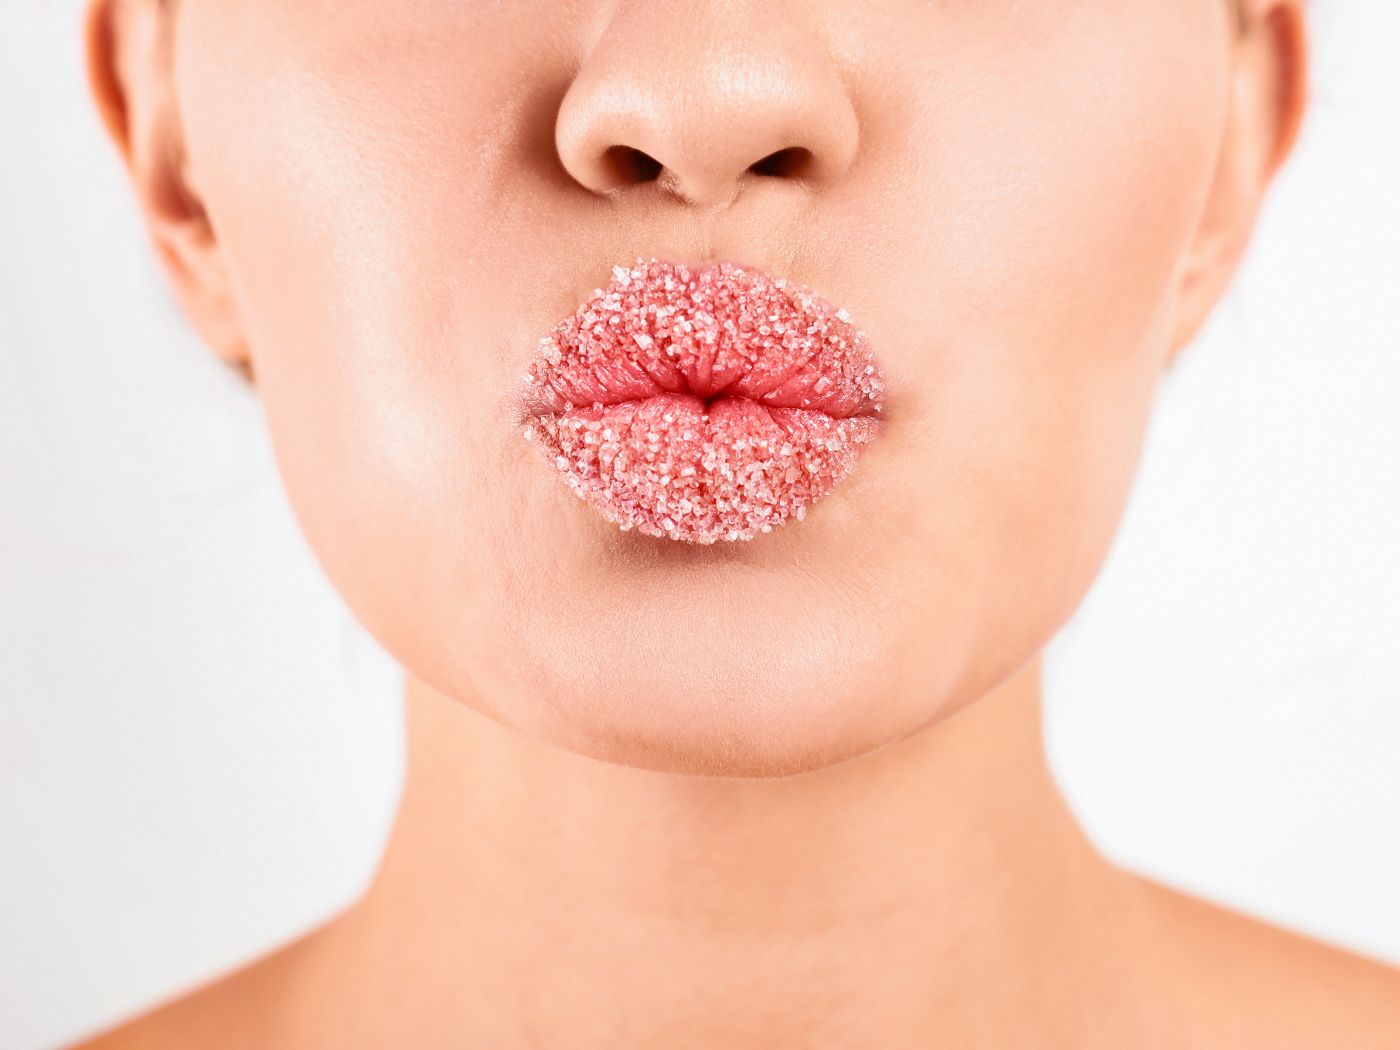 Lip Scrub: 4 Reasons Why We Need Lip Scrubs And How To Use Them